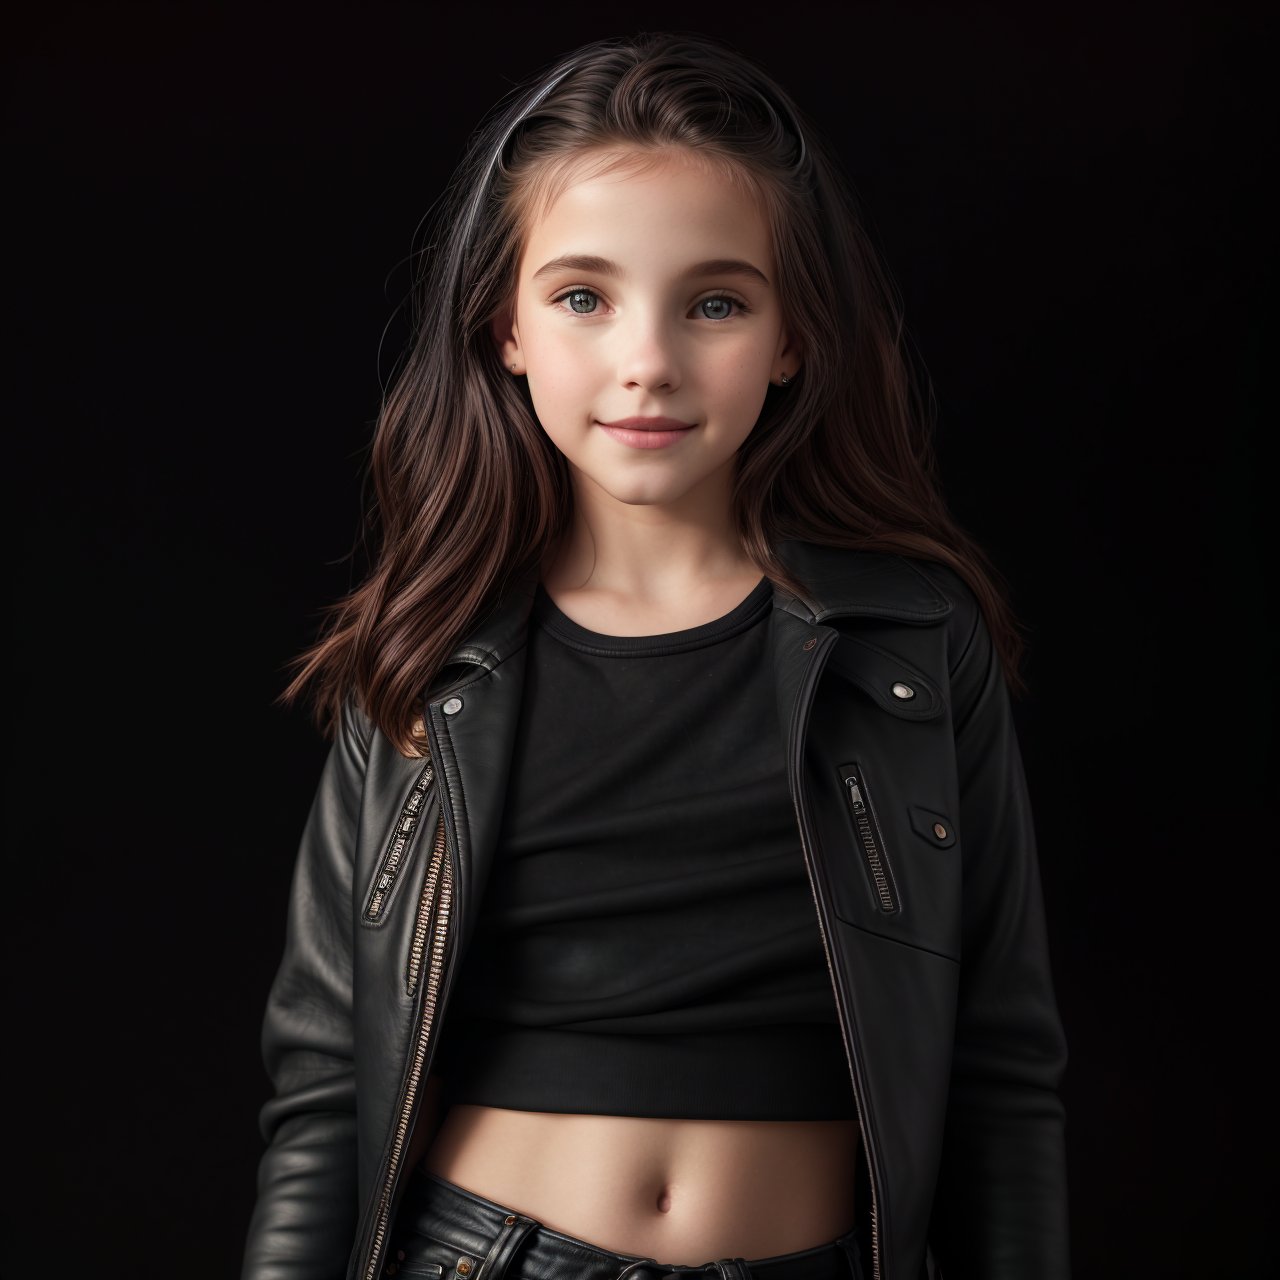 extra resolution, view from above, full body portrait of beautiful (AIDA_LoRA_arusso:1.09) <lora:AIDA_LoRA_arusso:0.68> as little girl in a leather jacket, pretty face, naughty, funny, happy, playful, intimate, flirting with camera, hyper realistic, studio photo, studio photo, kkw-ph1, hdr, f1.8, (colorful:1.1), (black background:1.5)